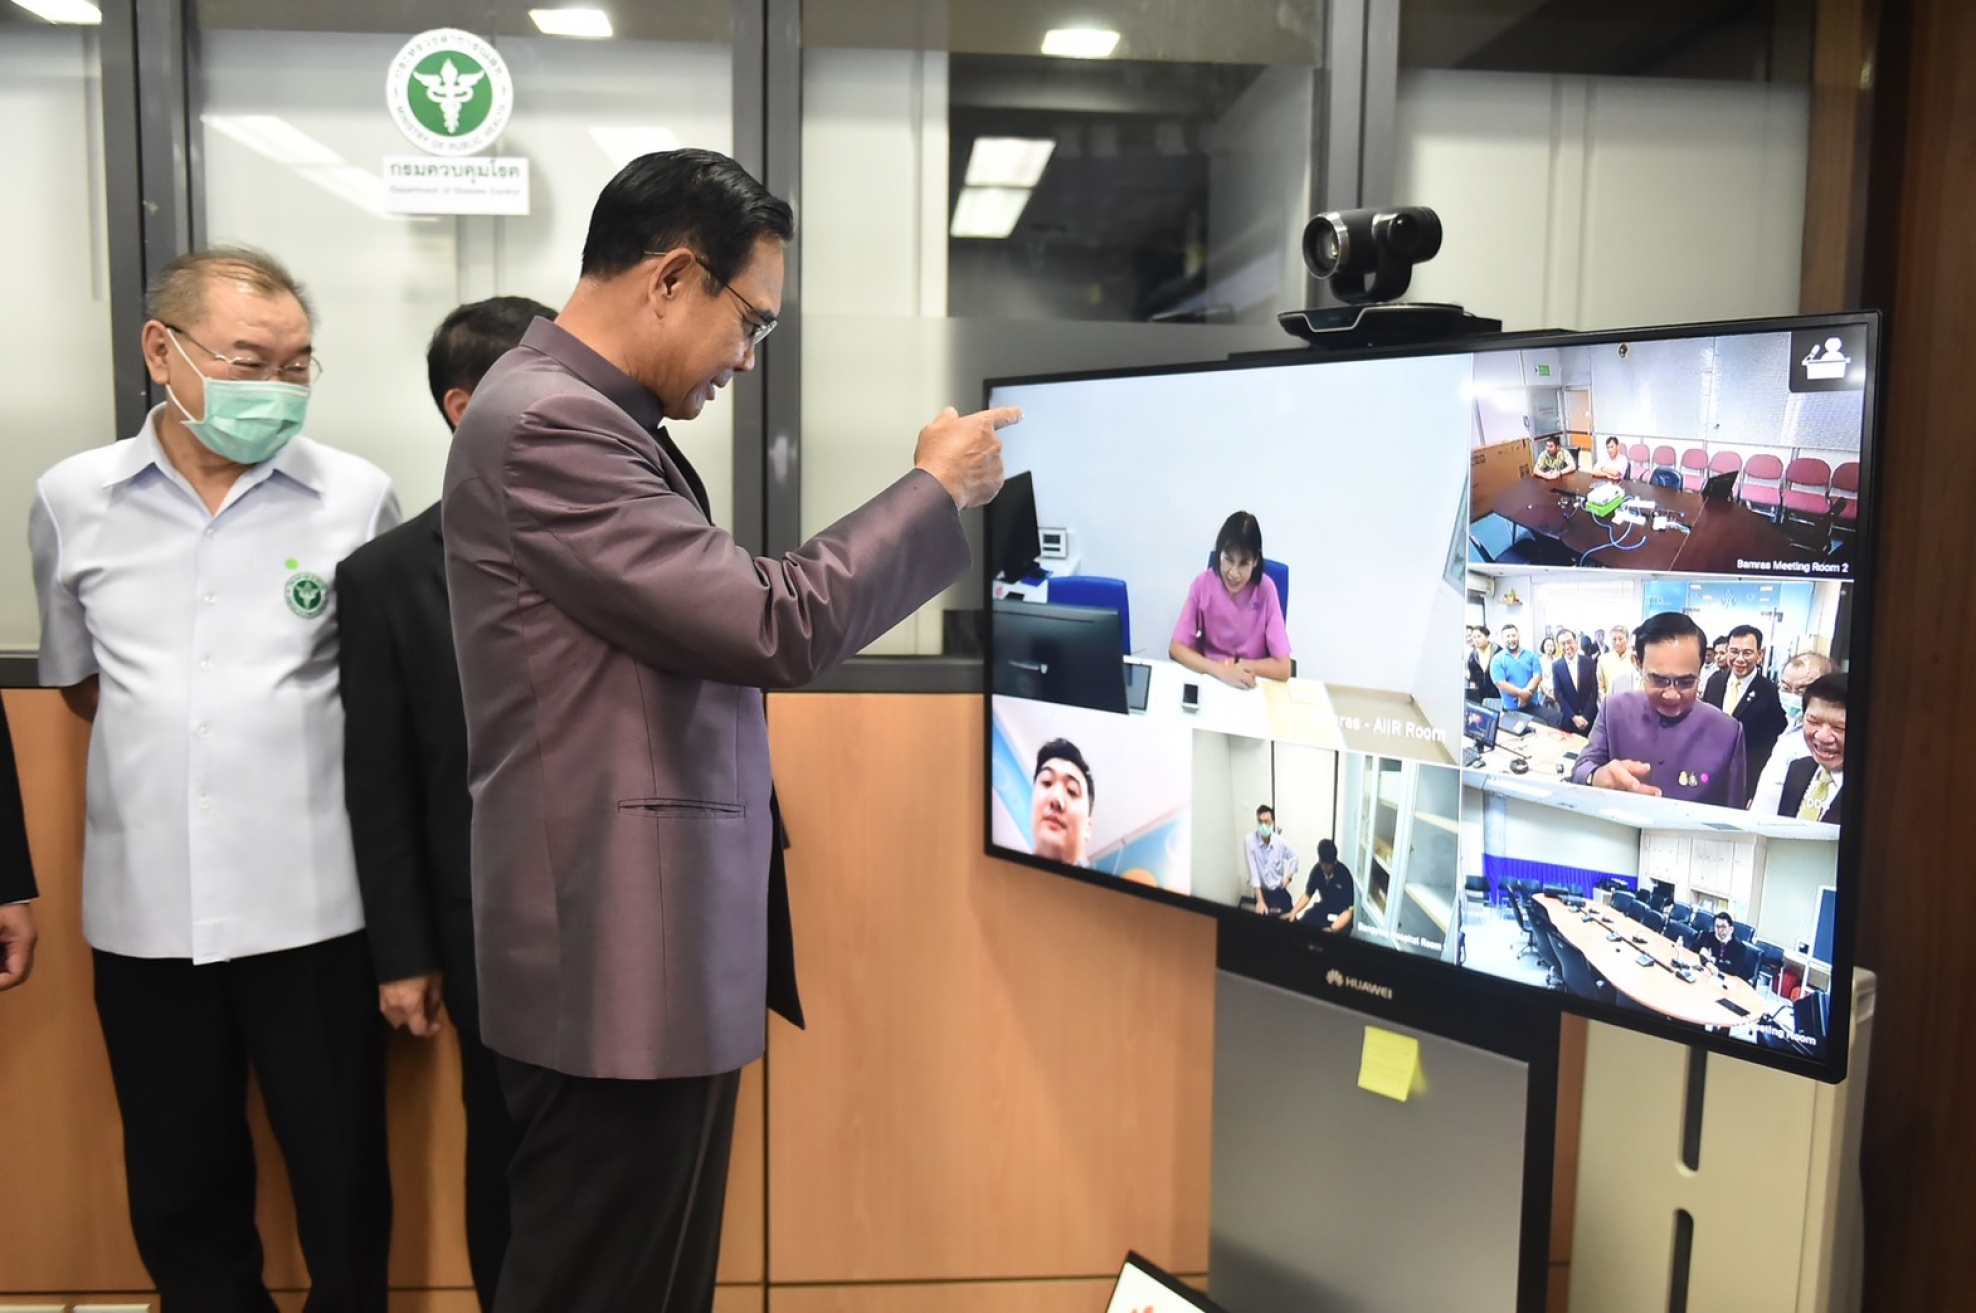 A Thai official testing a Telemedicine Video Conference Solution, donated by Huawei to combat COVID-19